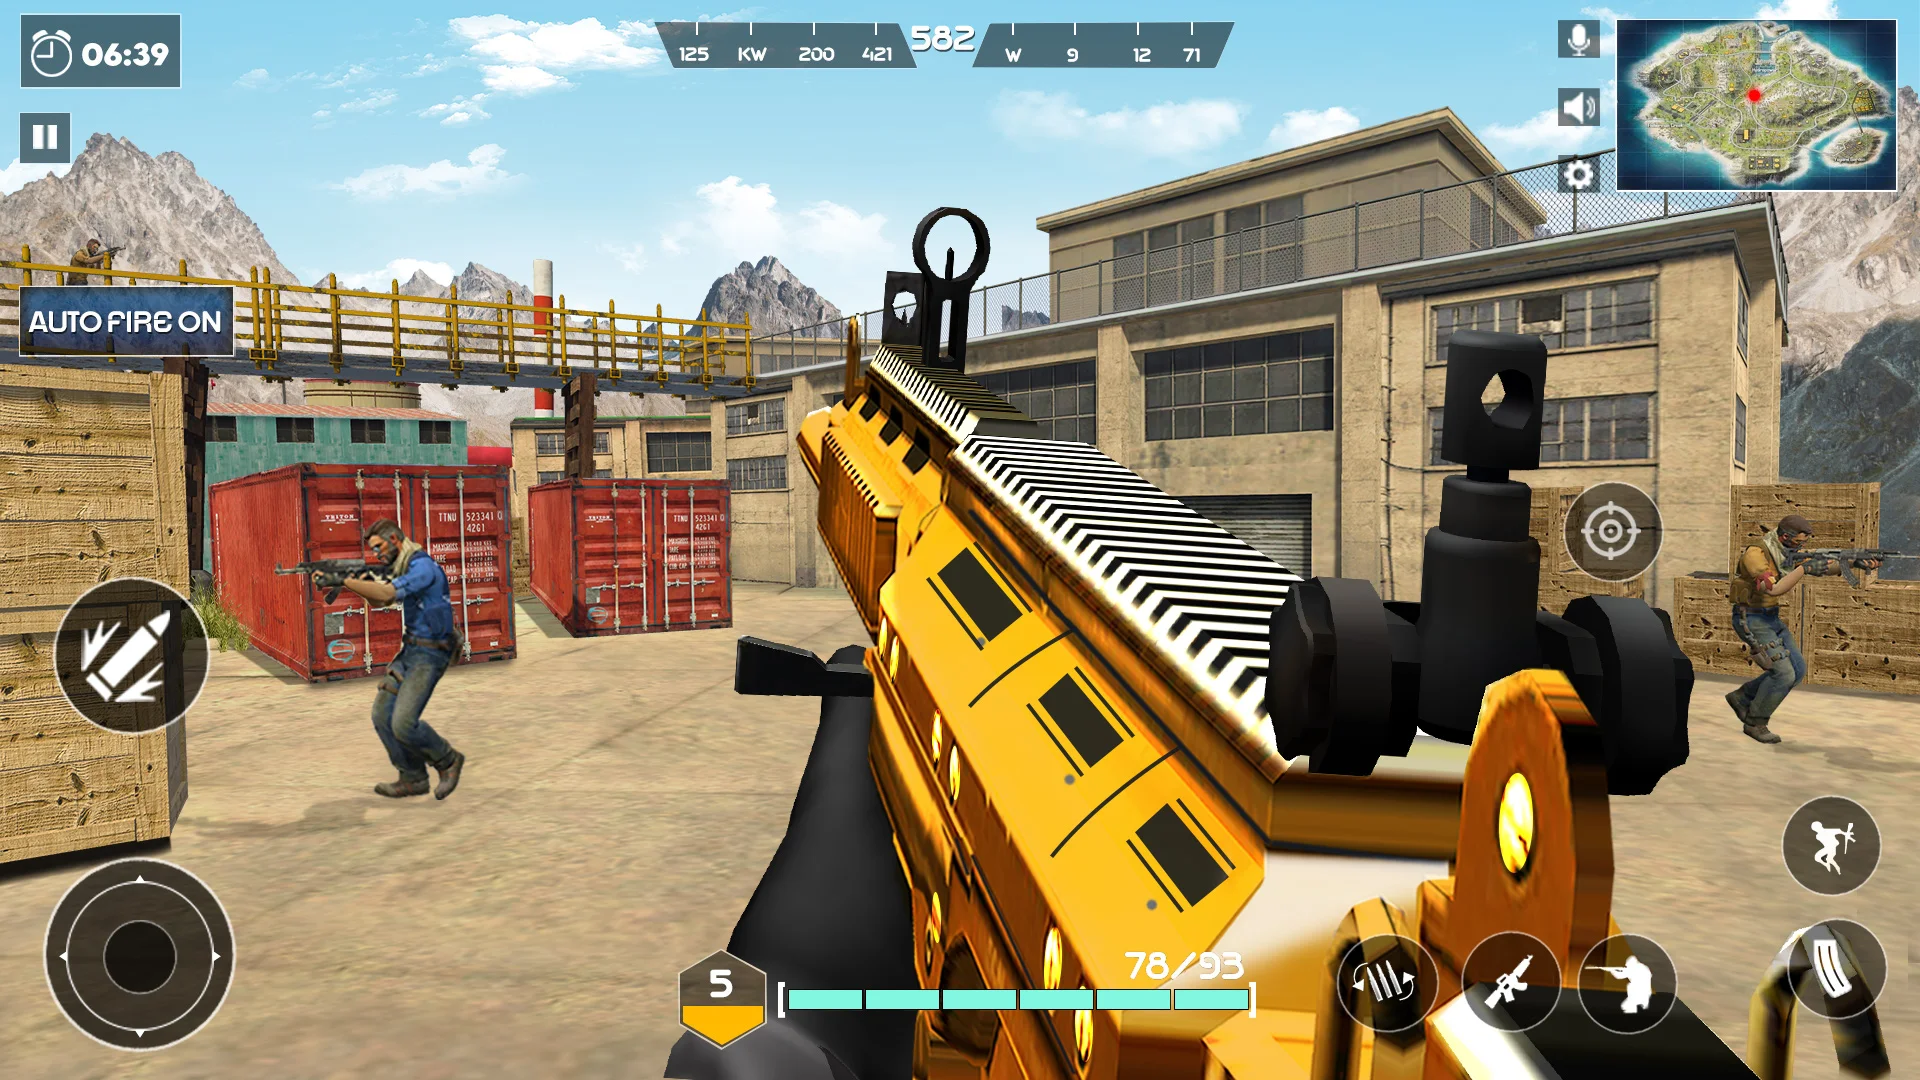 Fps Gun Shooting games IGI ops Game for Android